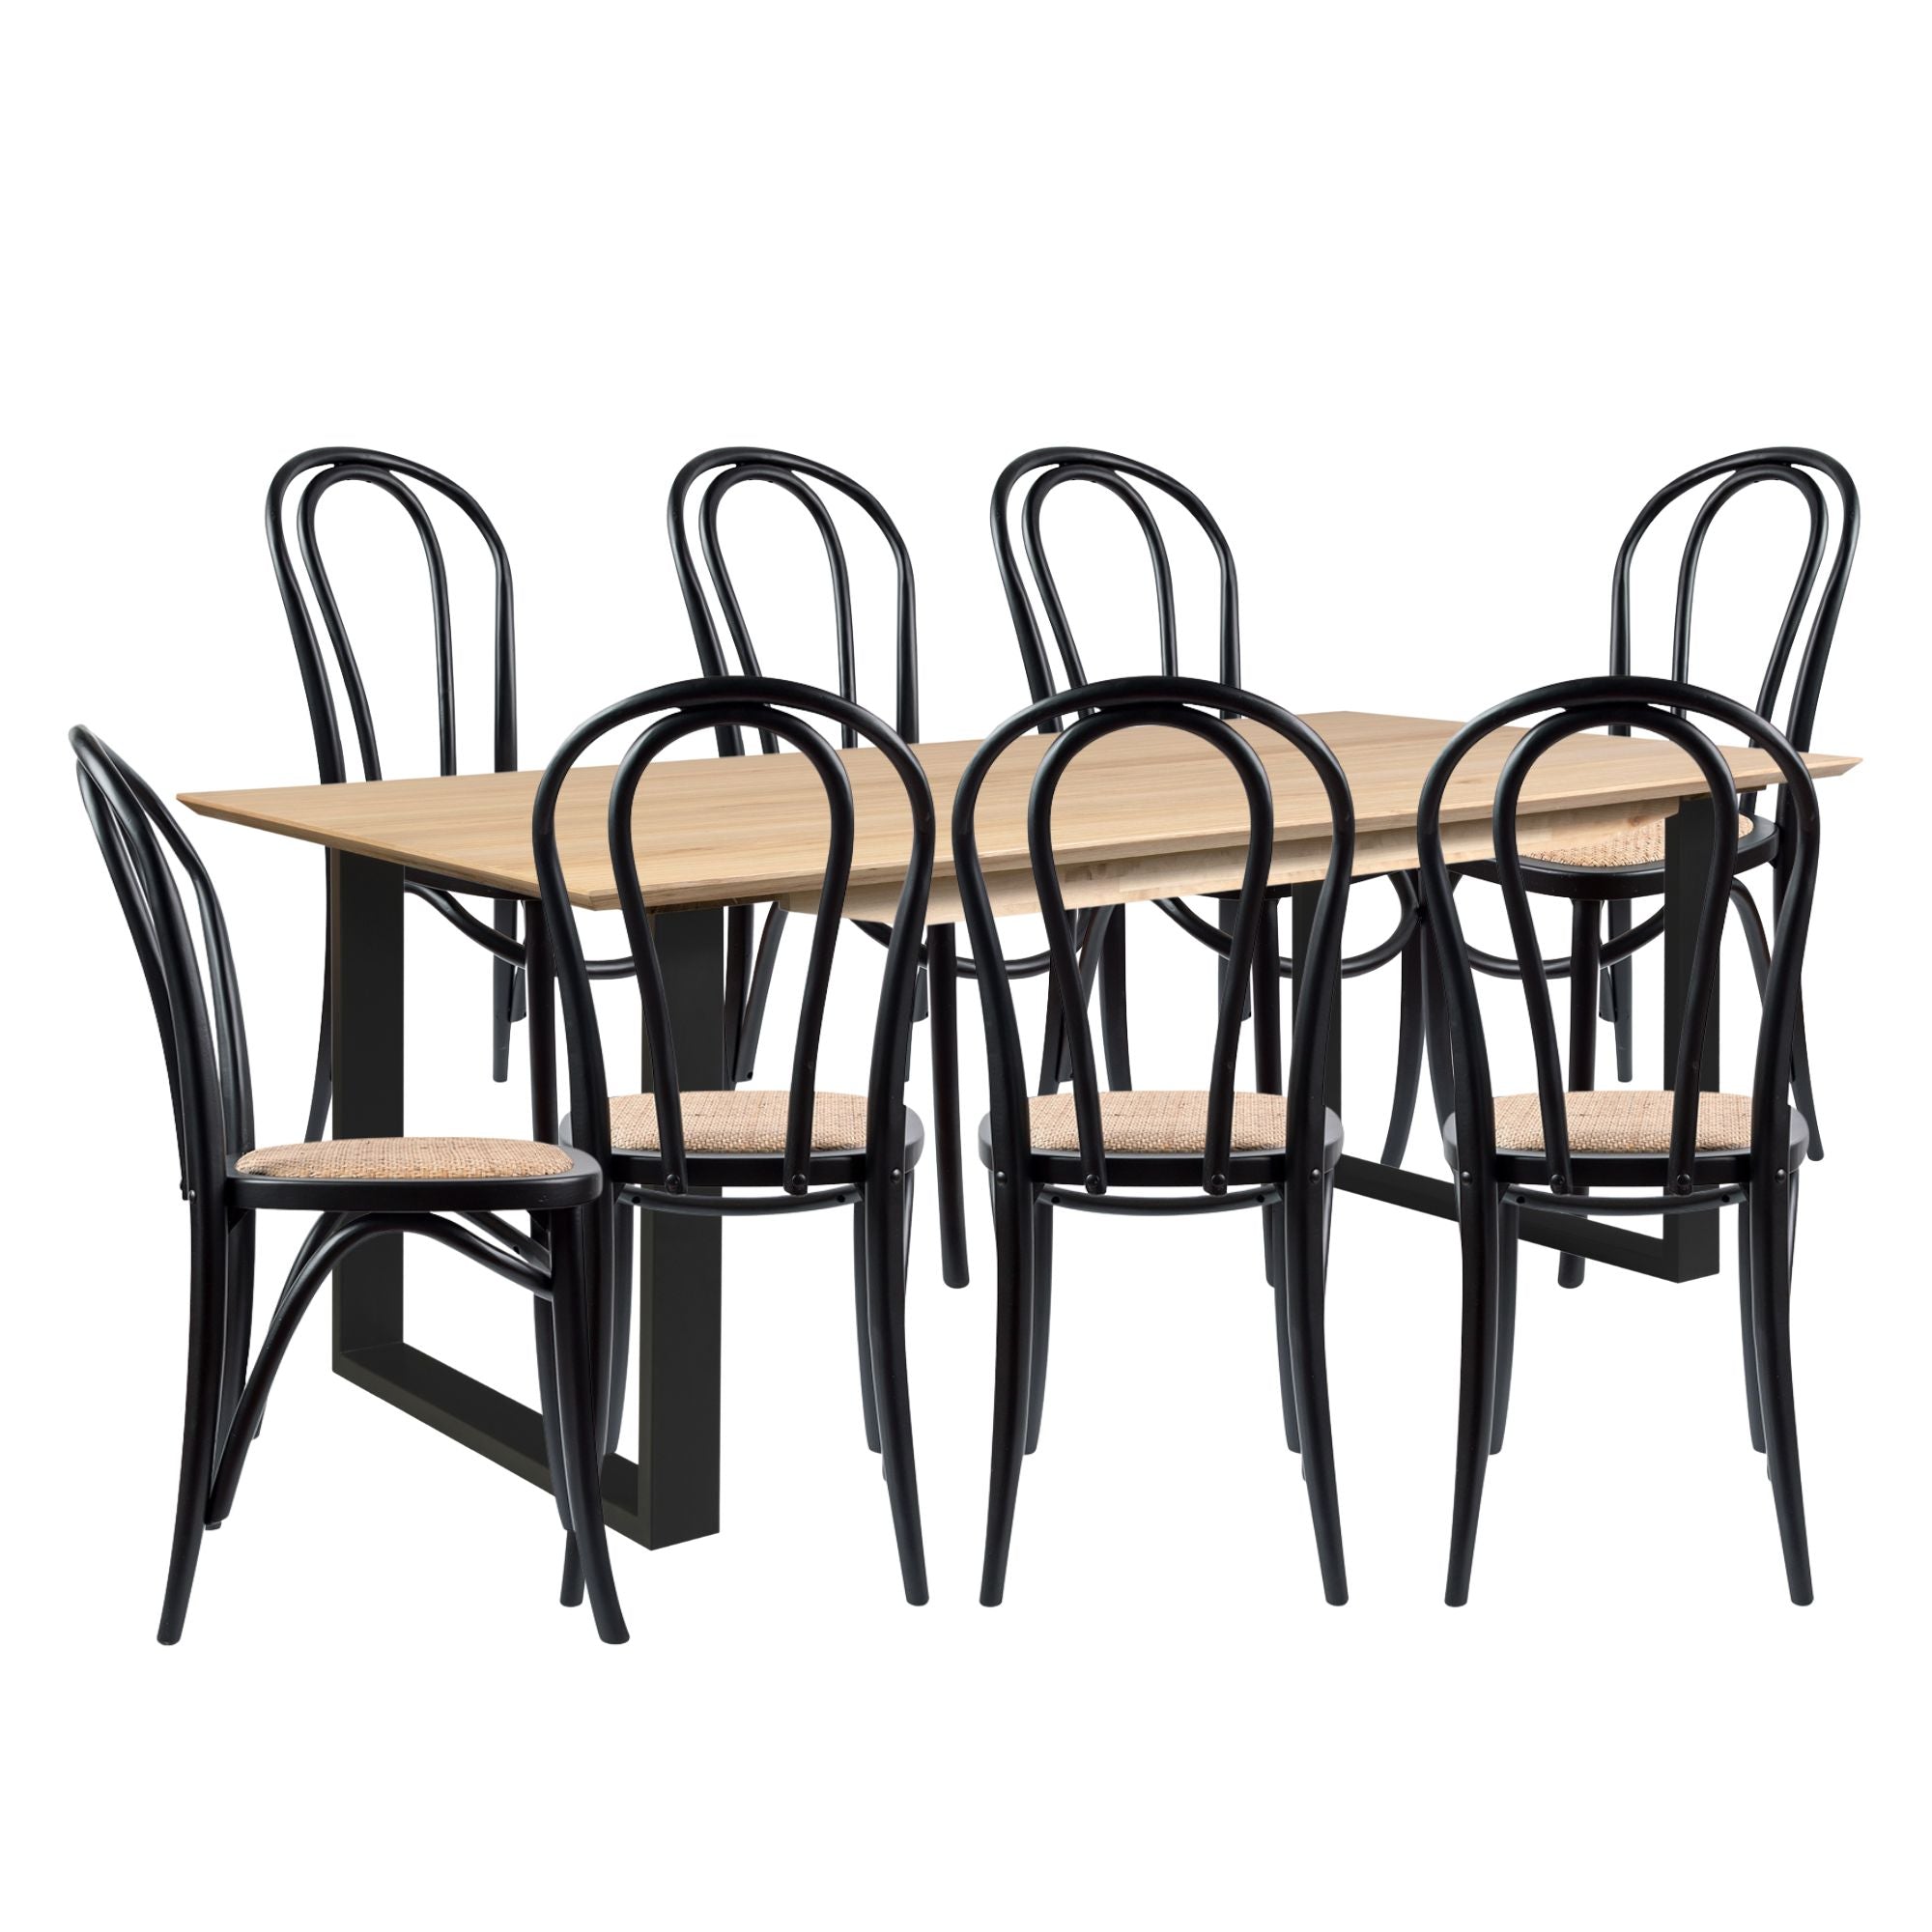 Aconite 9pc 210cm Dining Table Set 8 Arched Back Chair Solid Messmate Timber - SILBERSHELL